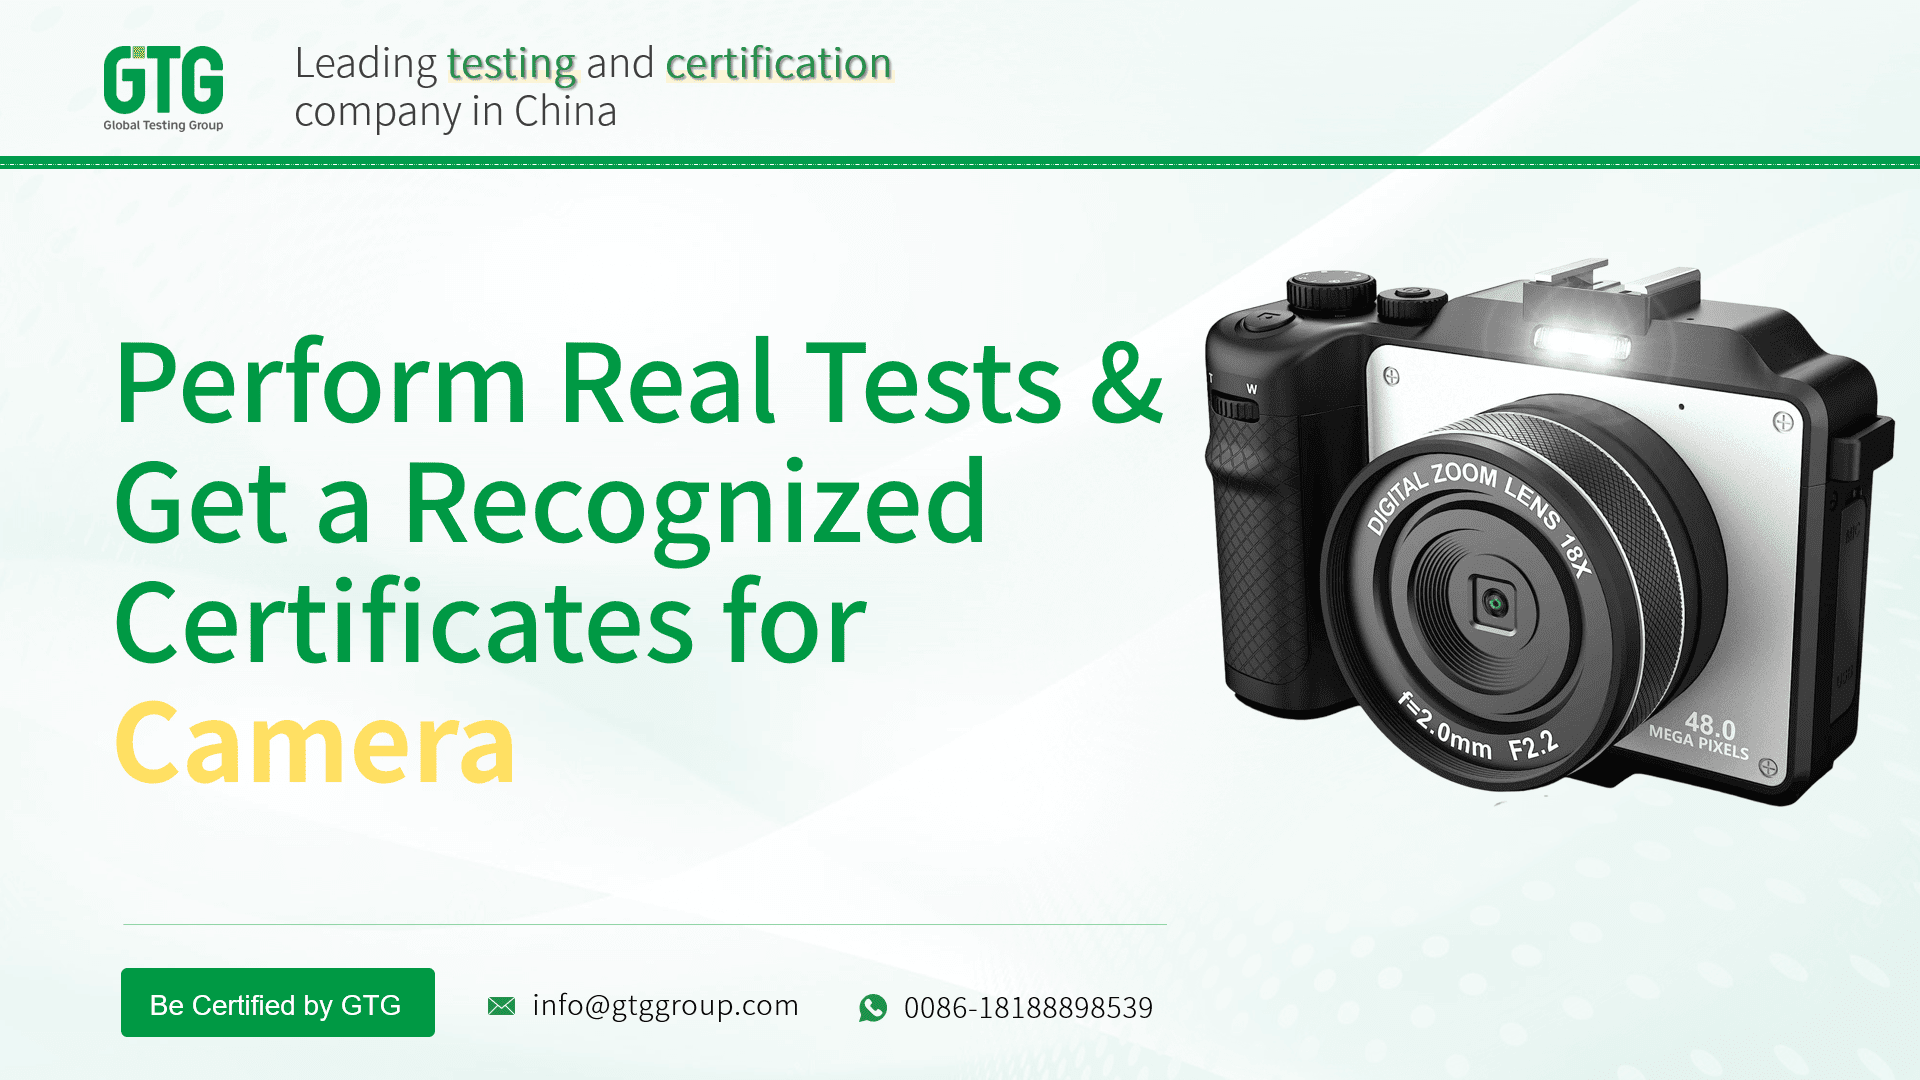 Get Test Report and Certifications for Camera from GTG Group